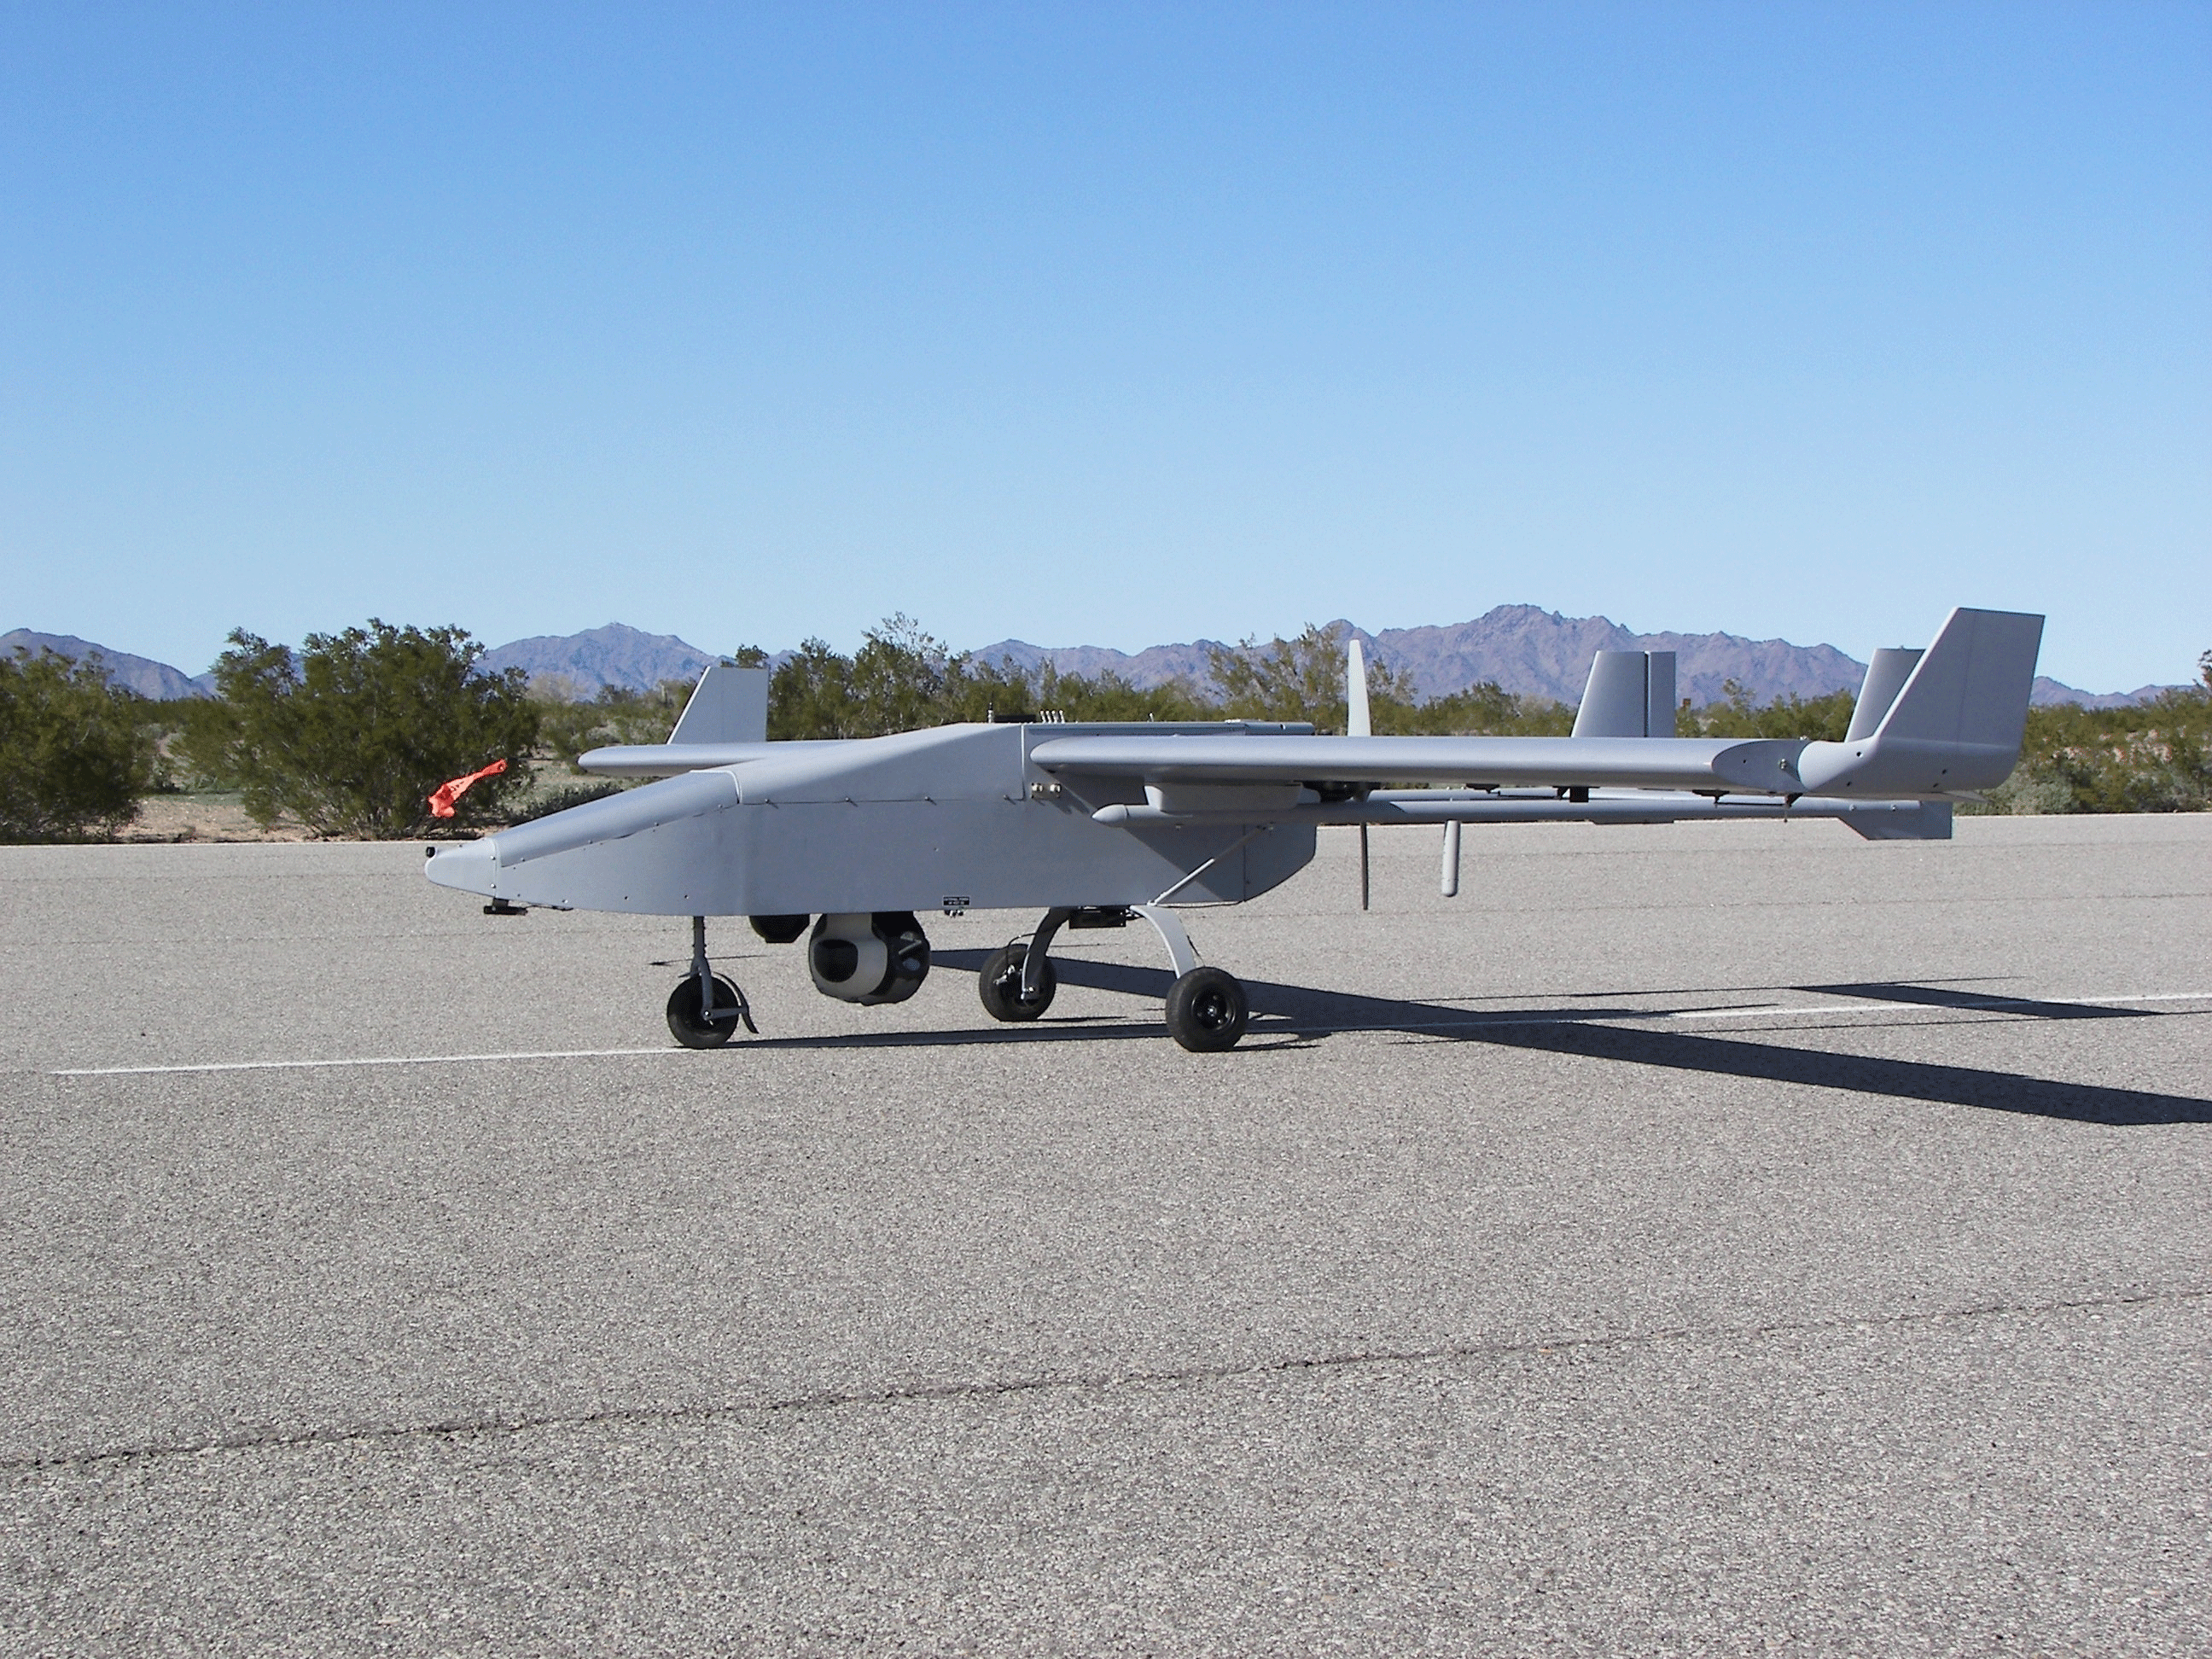 Example of an unmanned aerial vehicle.